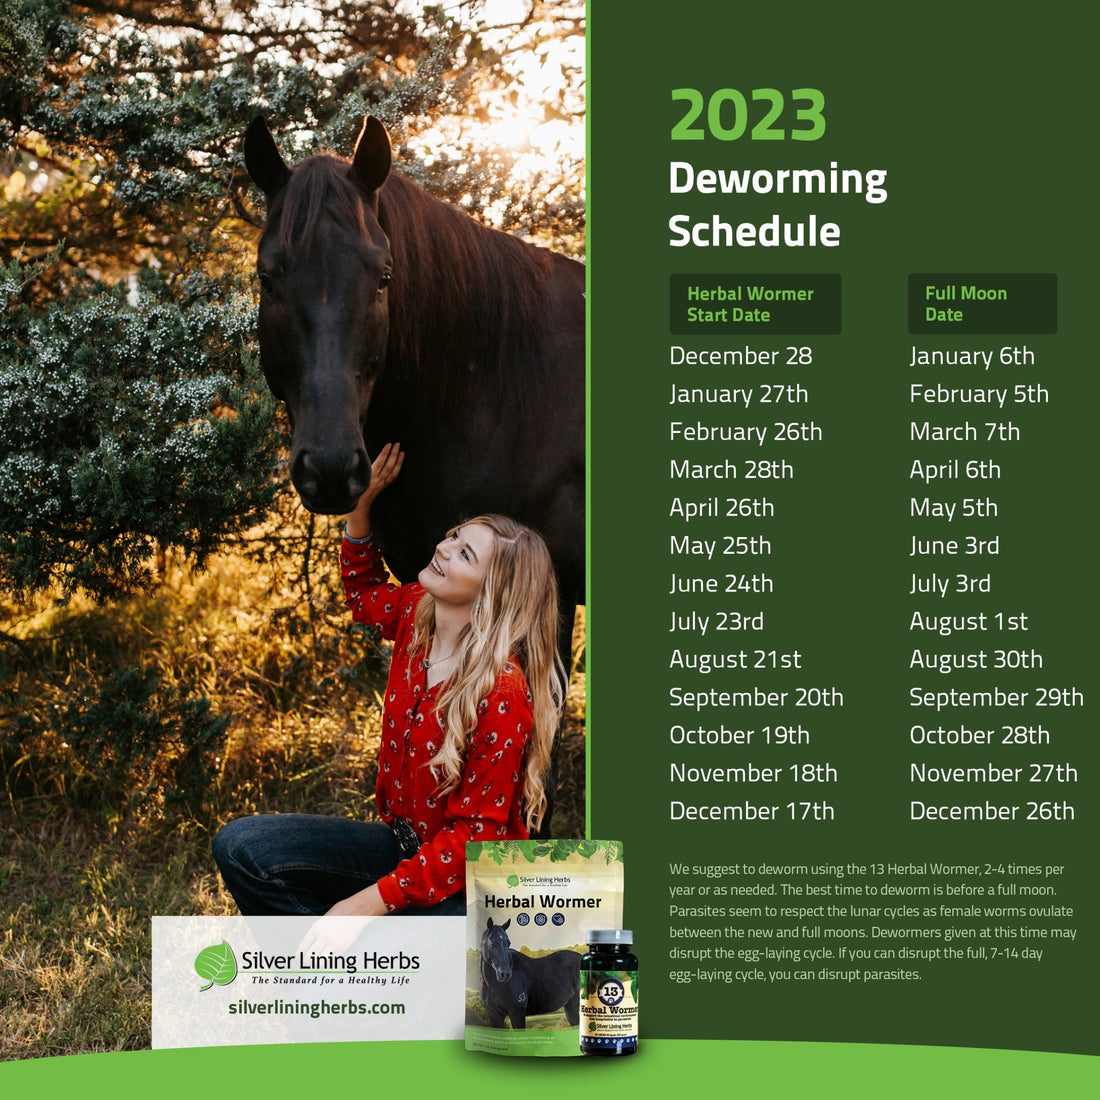 Deworming Schedule for Horses and Dogs (2023) - Silver Lining Herbs